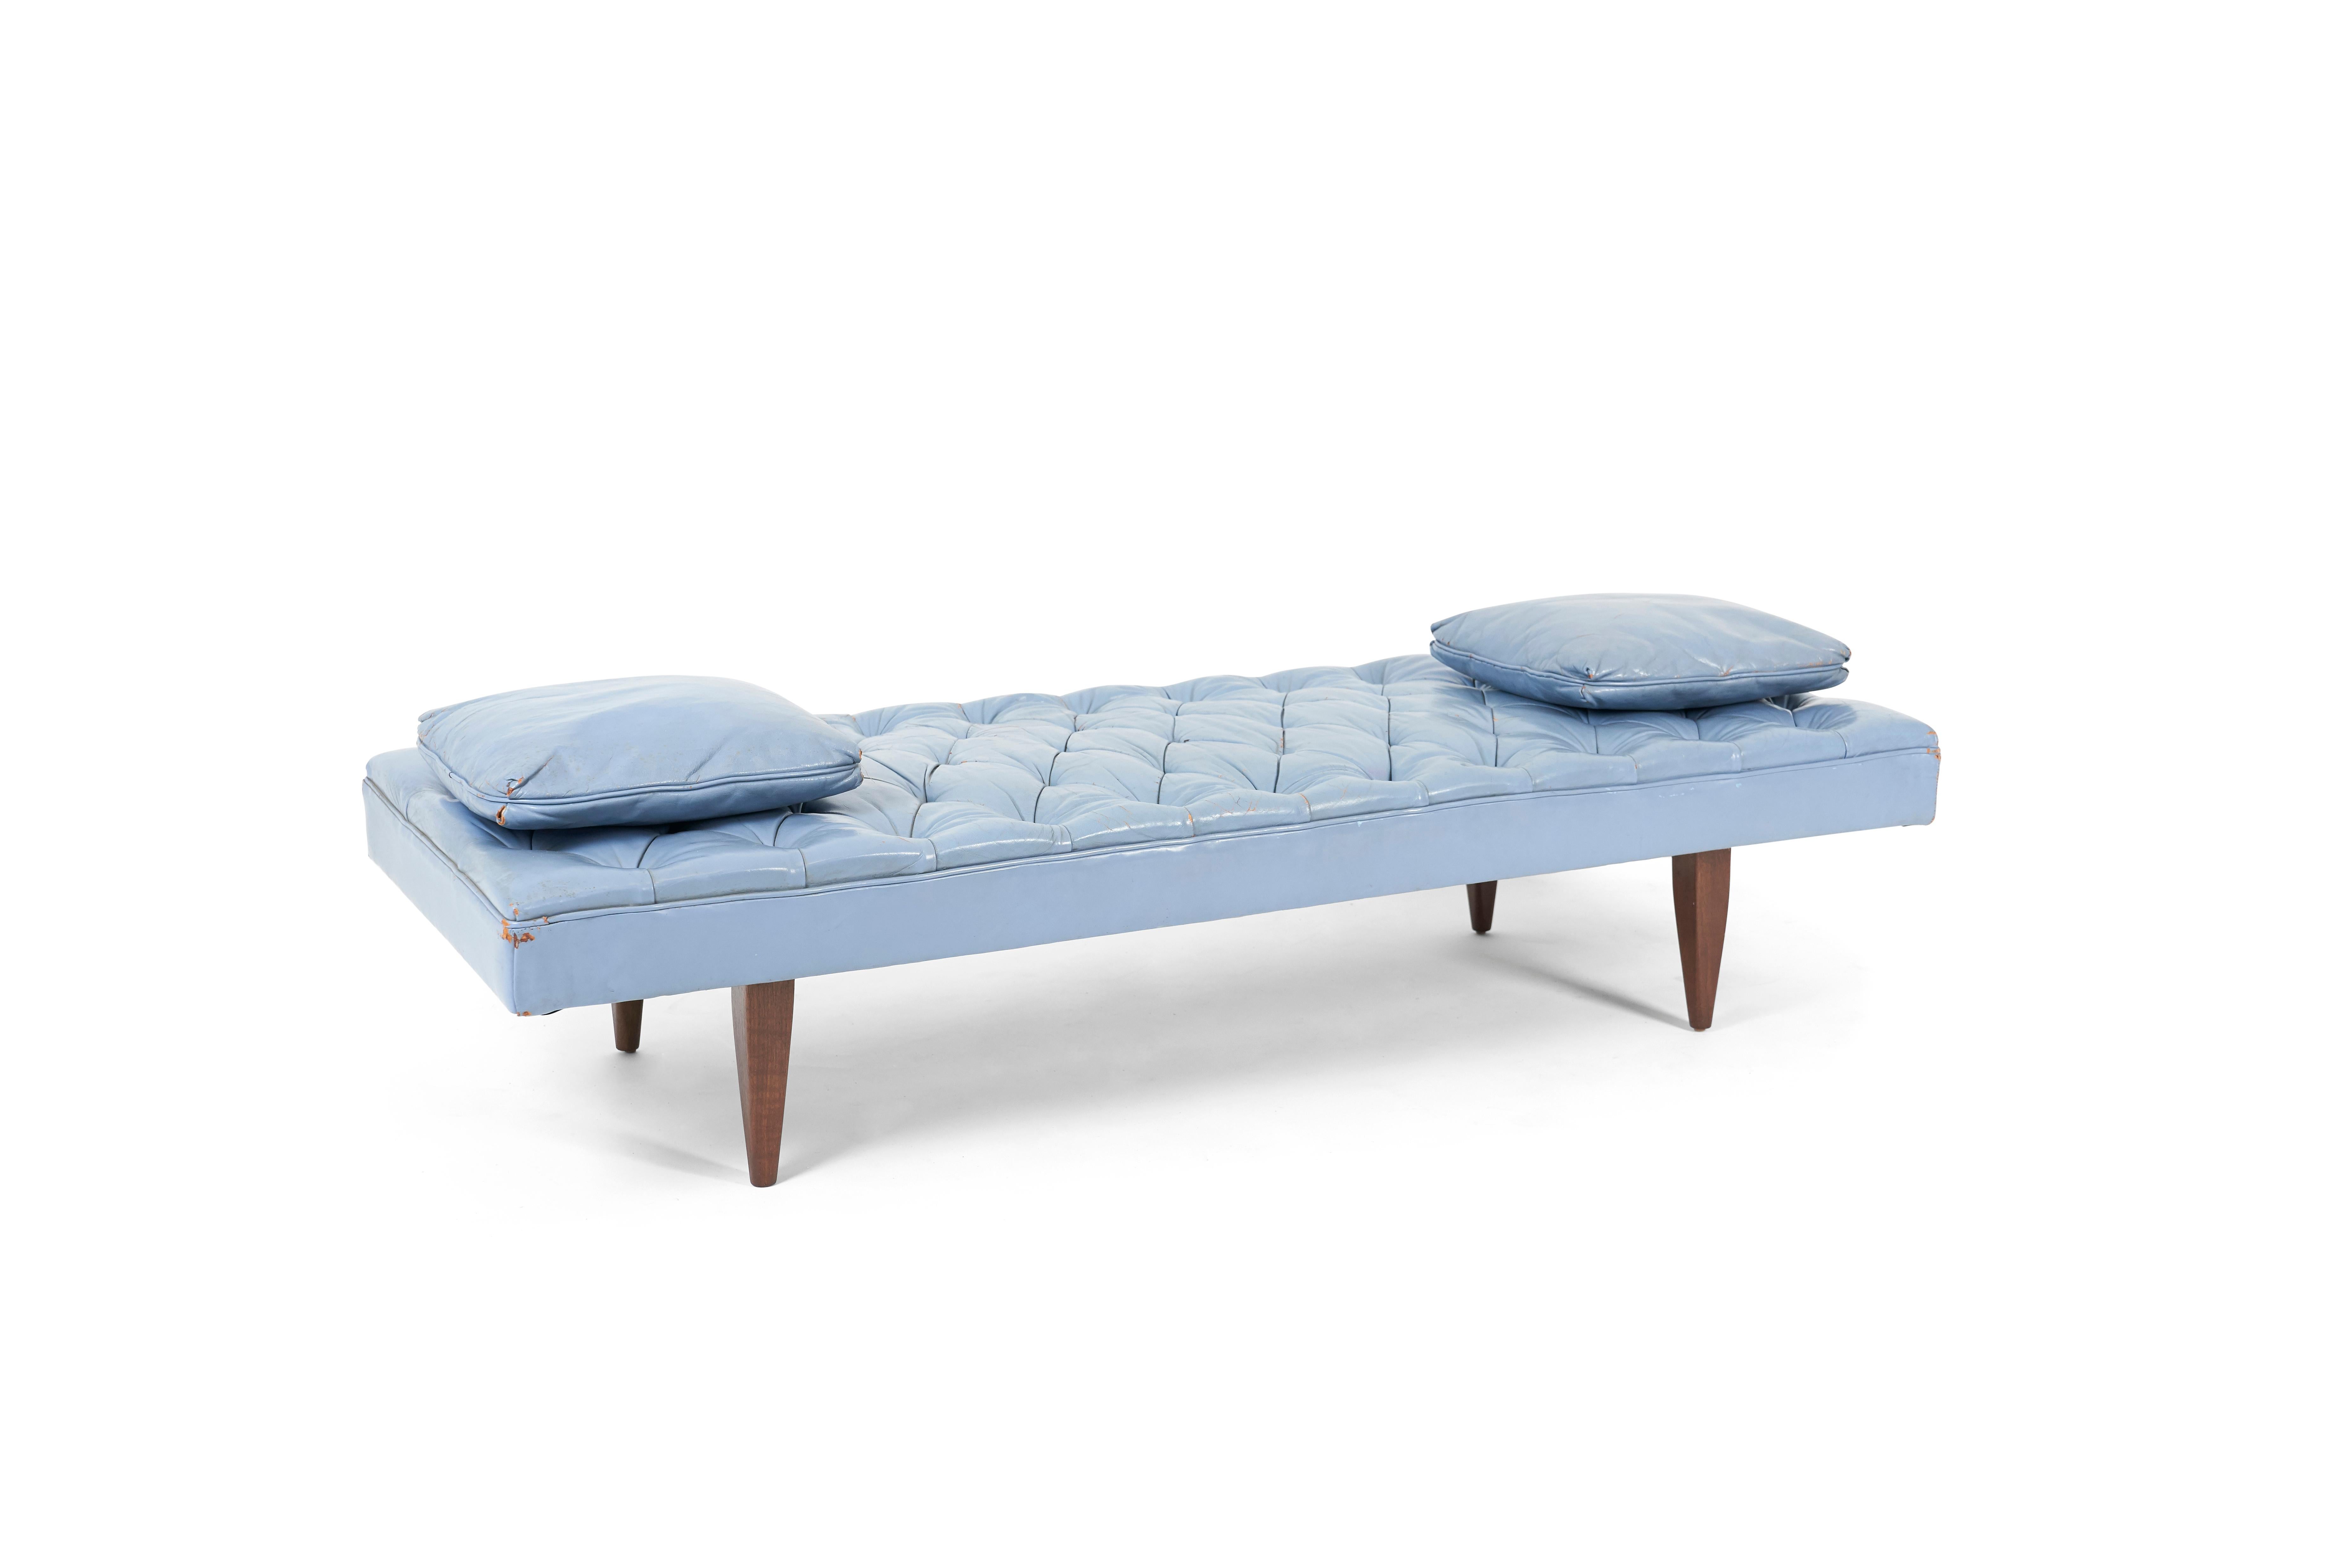 American Kipp Stewart Chesterfield Tufted Leather Daybed, Calvin Furniture 1960s